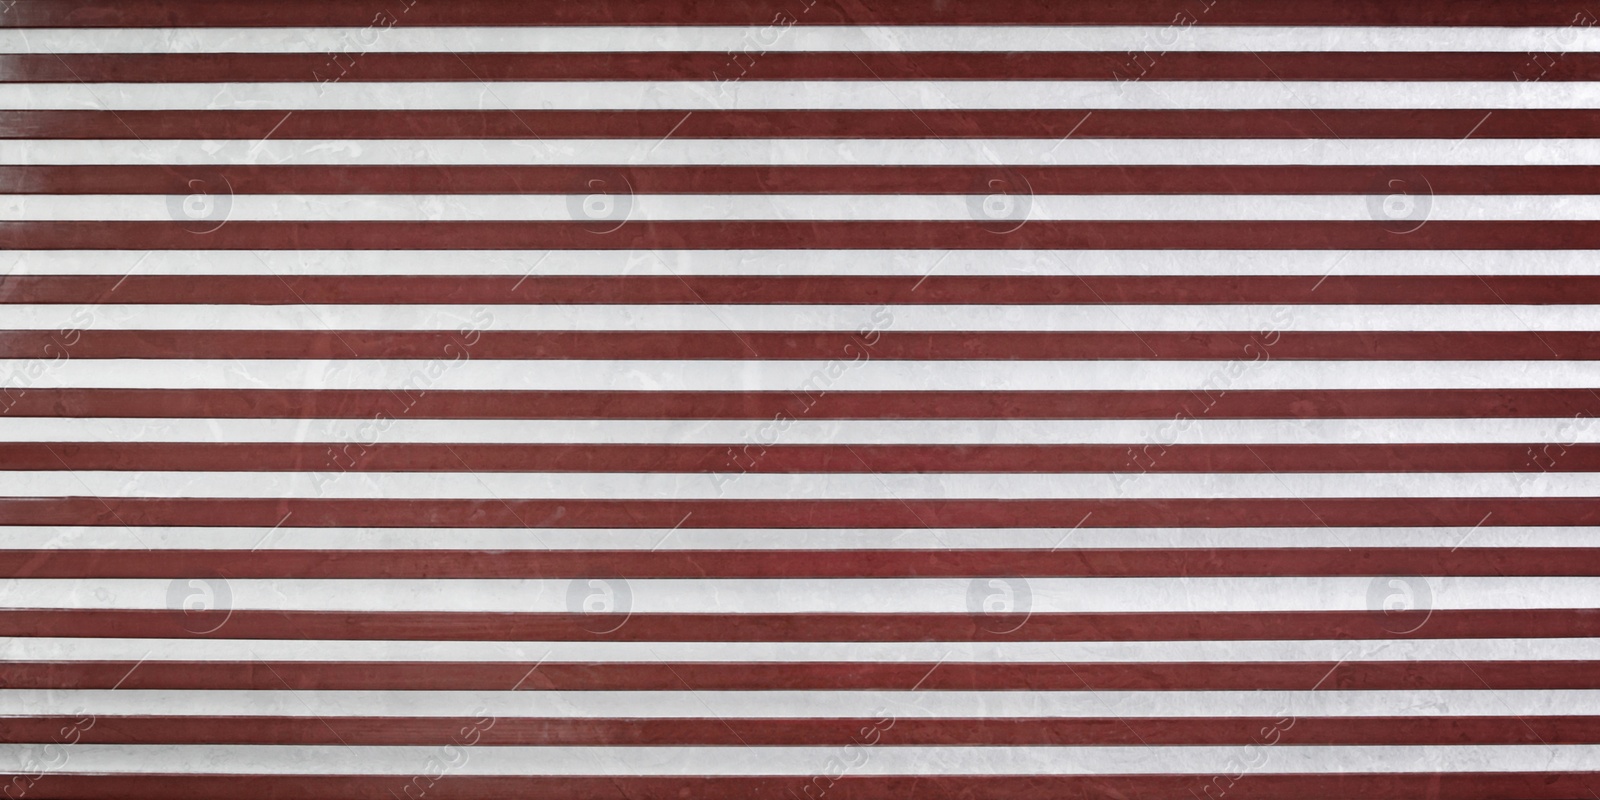 Image of Wall paper design. Red and white wooden planks as background